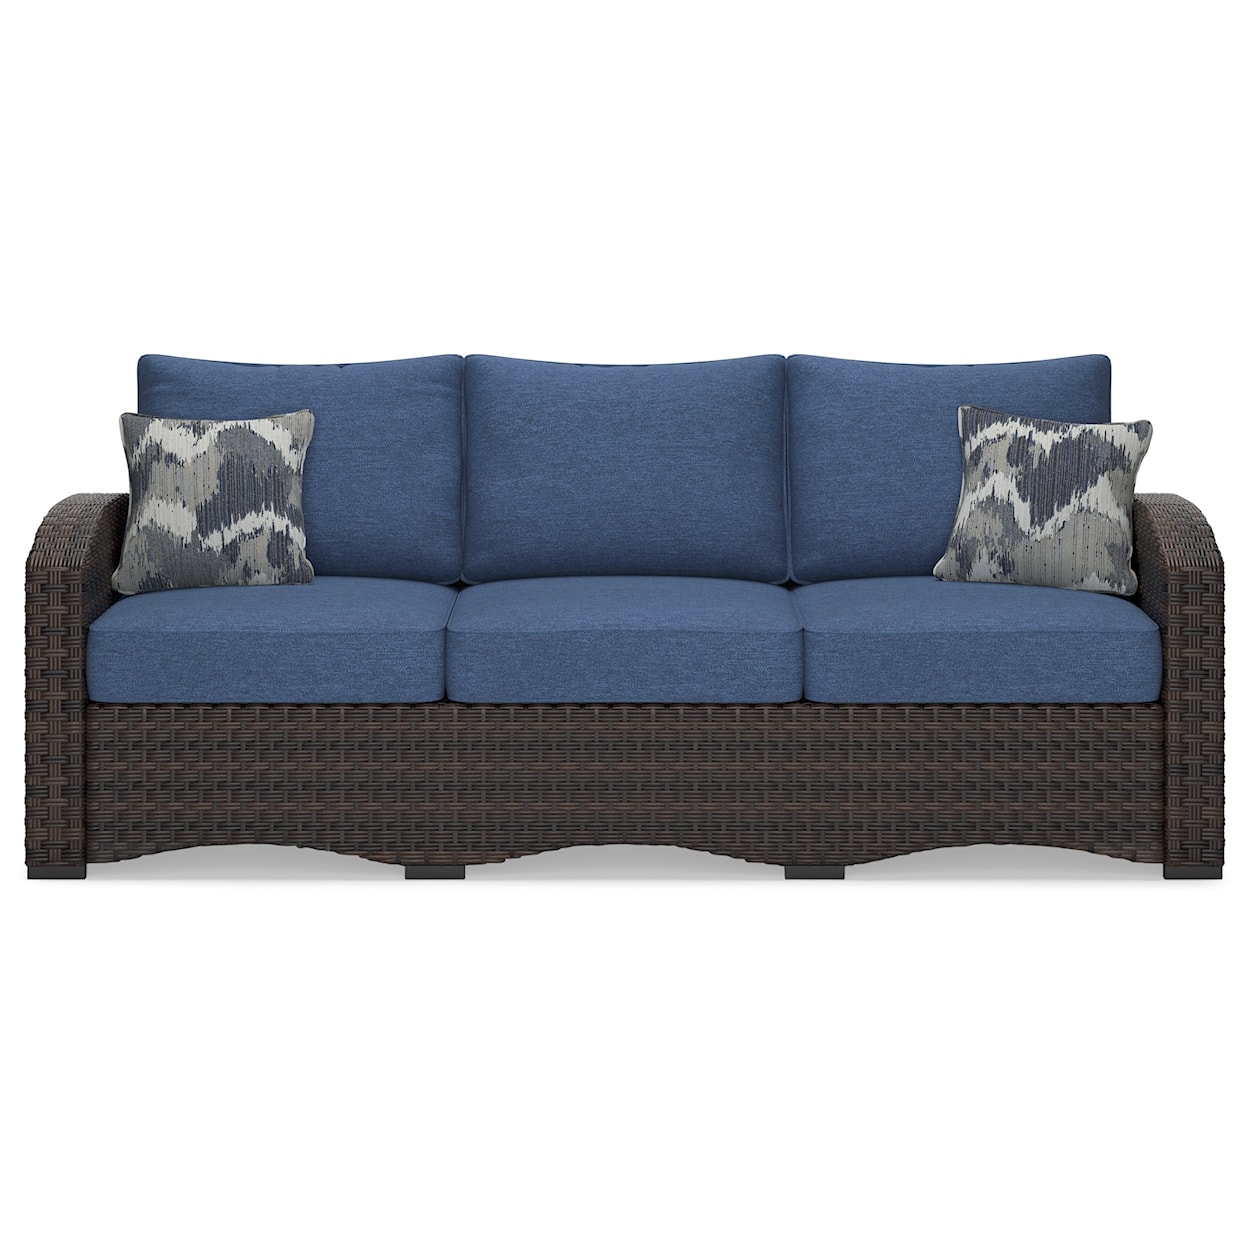 Signature Design Windglow Outdoor Sofa With Cushion